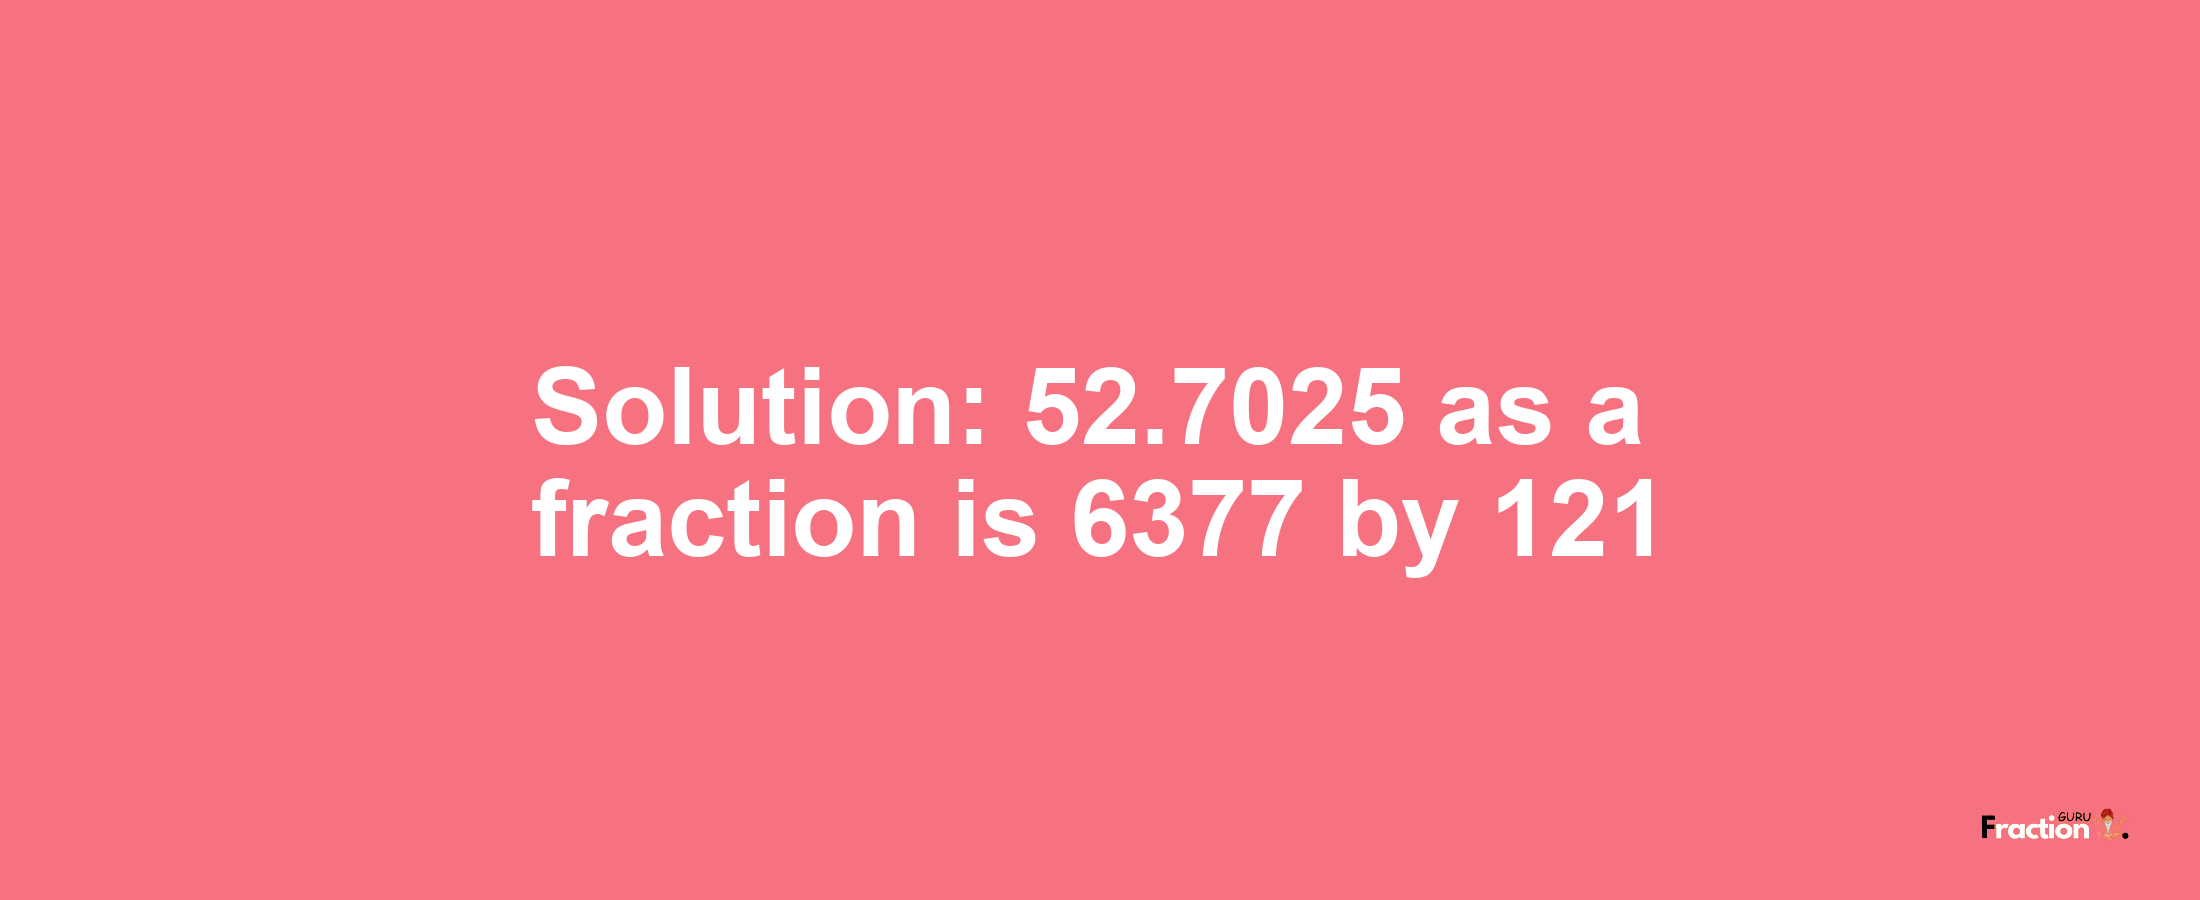 Solution:52.7025 as a fraction is 6377/121